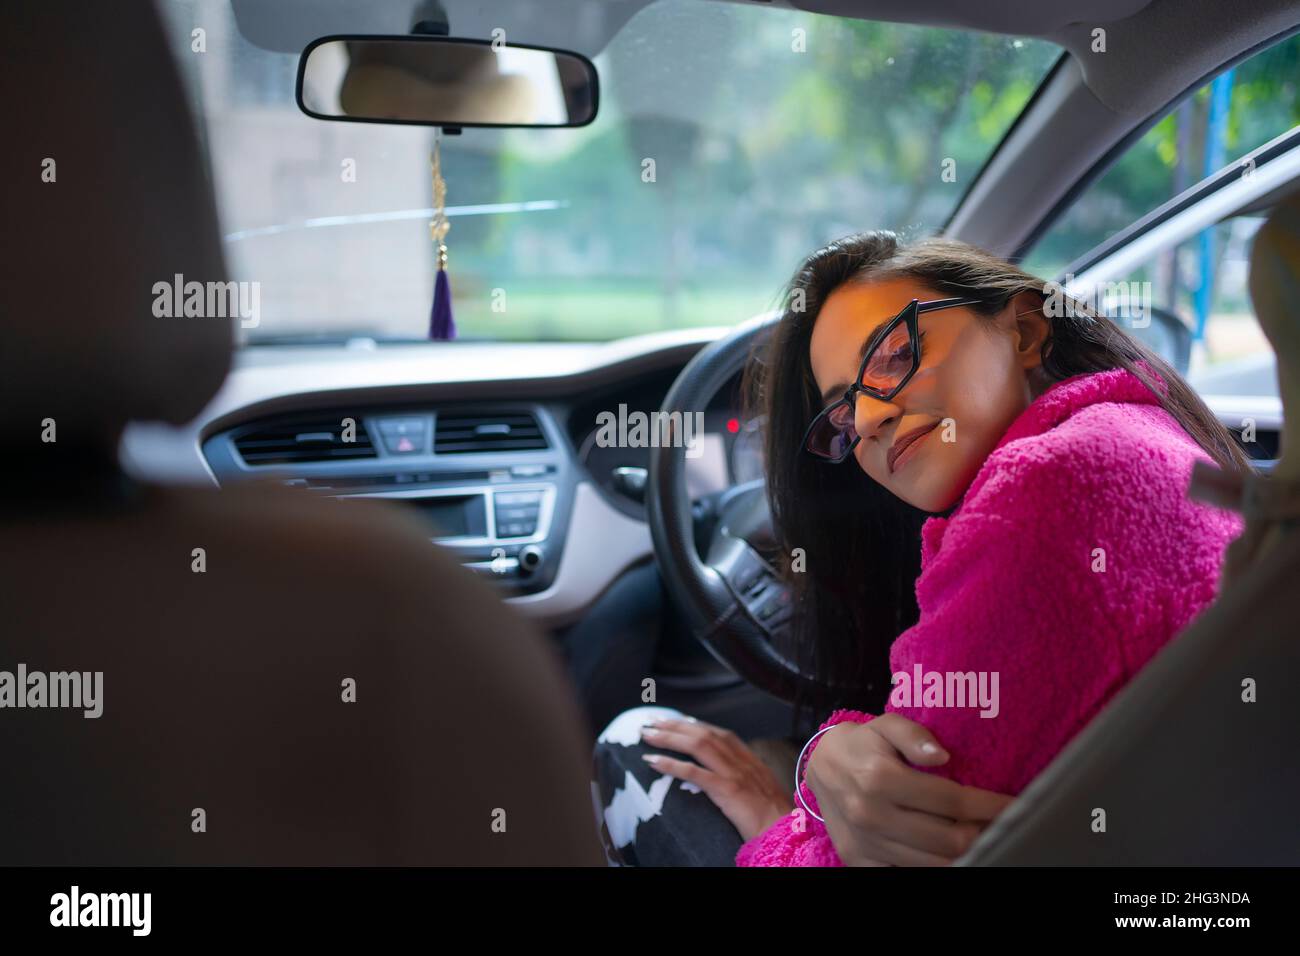 A young woman sitting in the driving seat of car looking at back seat. Stock Photo